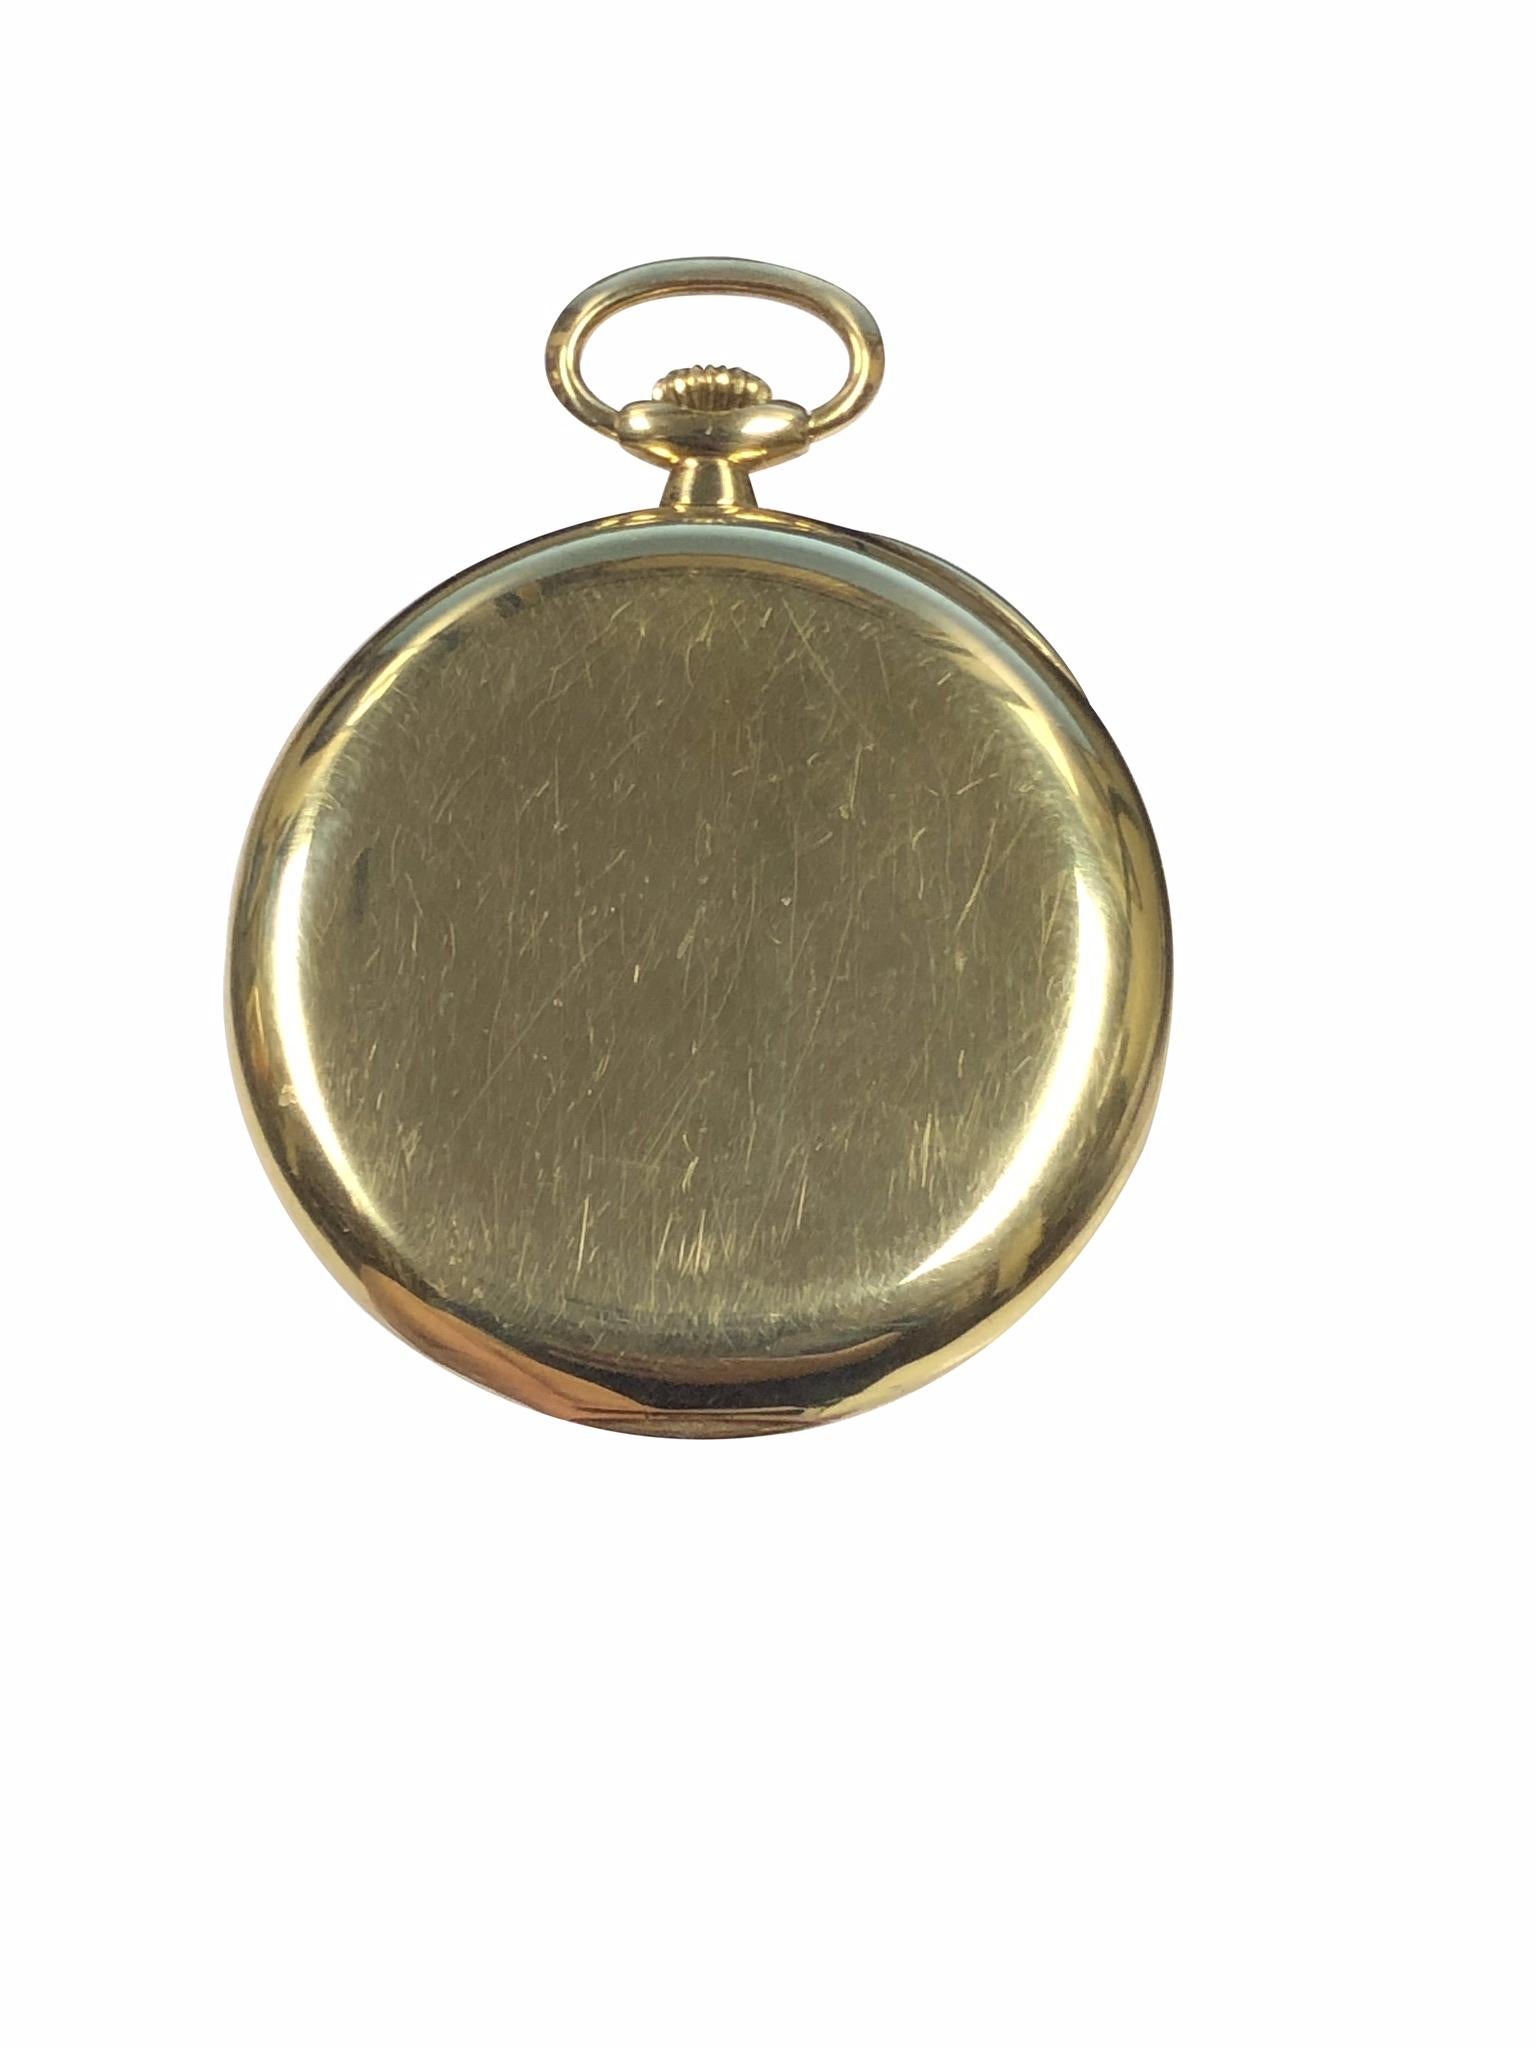 Circa 1940s very fine and clean Gents Patek Philippe Pocket Watch, 45 M.M. 3 piece 18k Yellow Gold case with inside dust cover, 18 Jewel nickle lever movement. Original Silver Satin dial with Raised Gold Arabic markers and Gold Hands. Triple Signed,